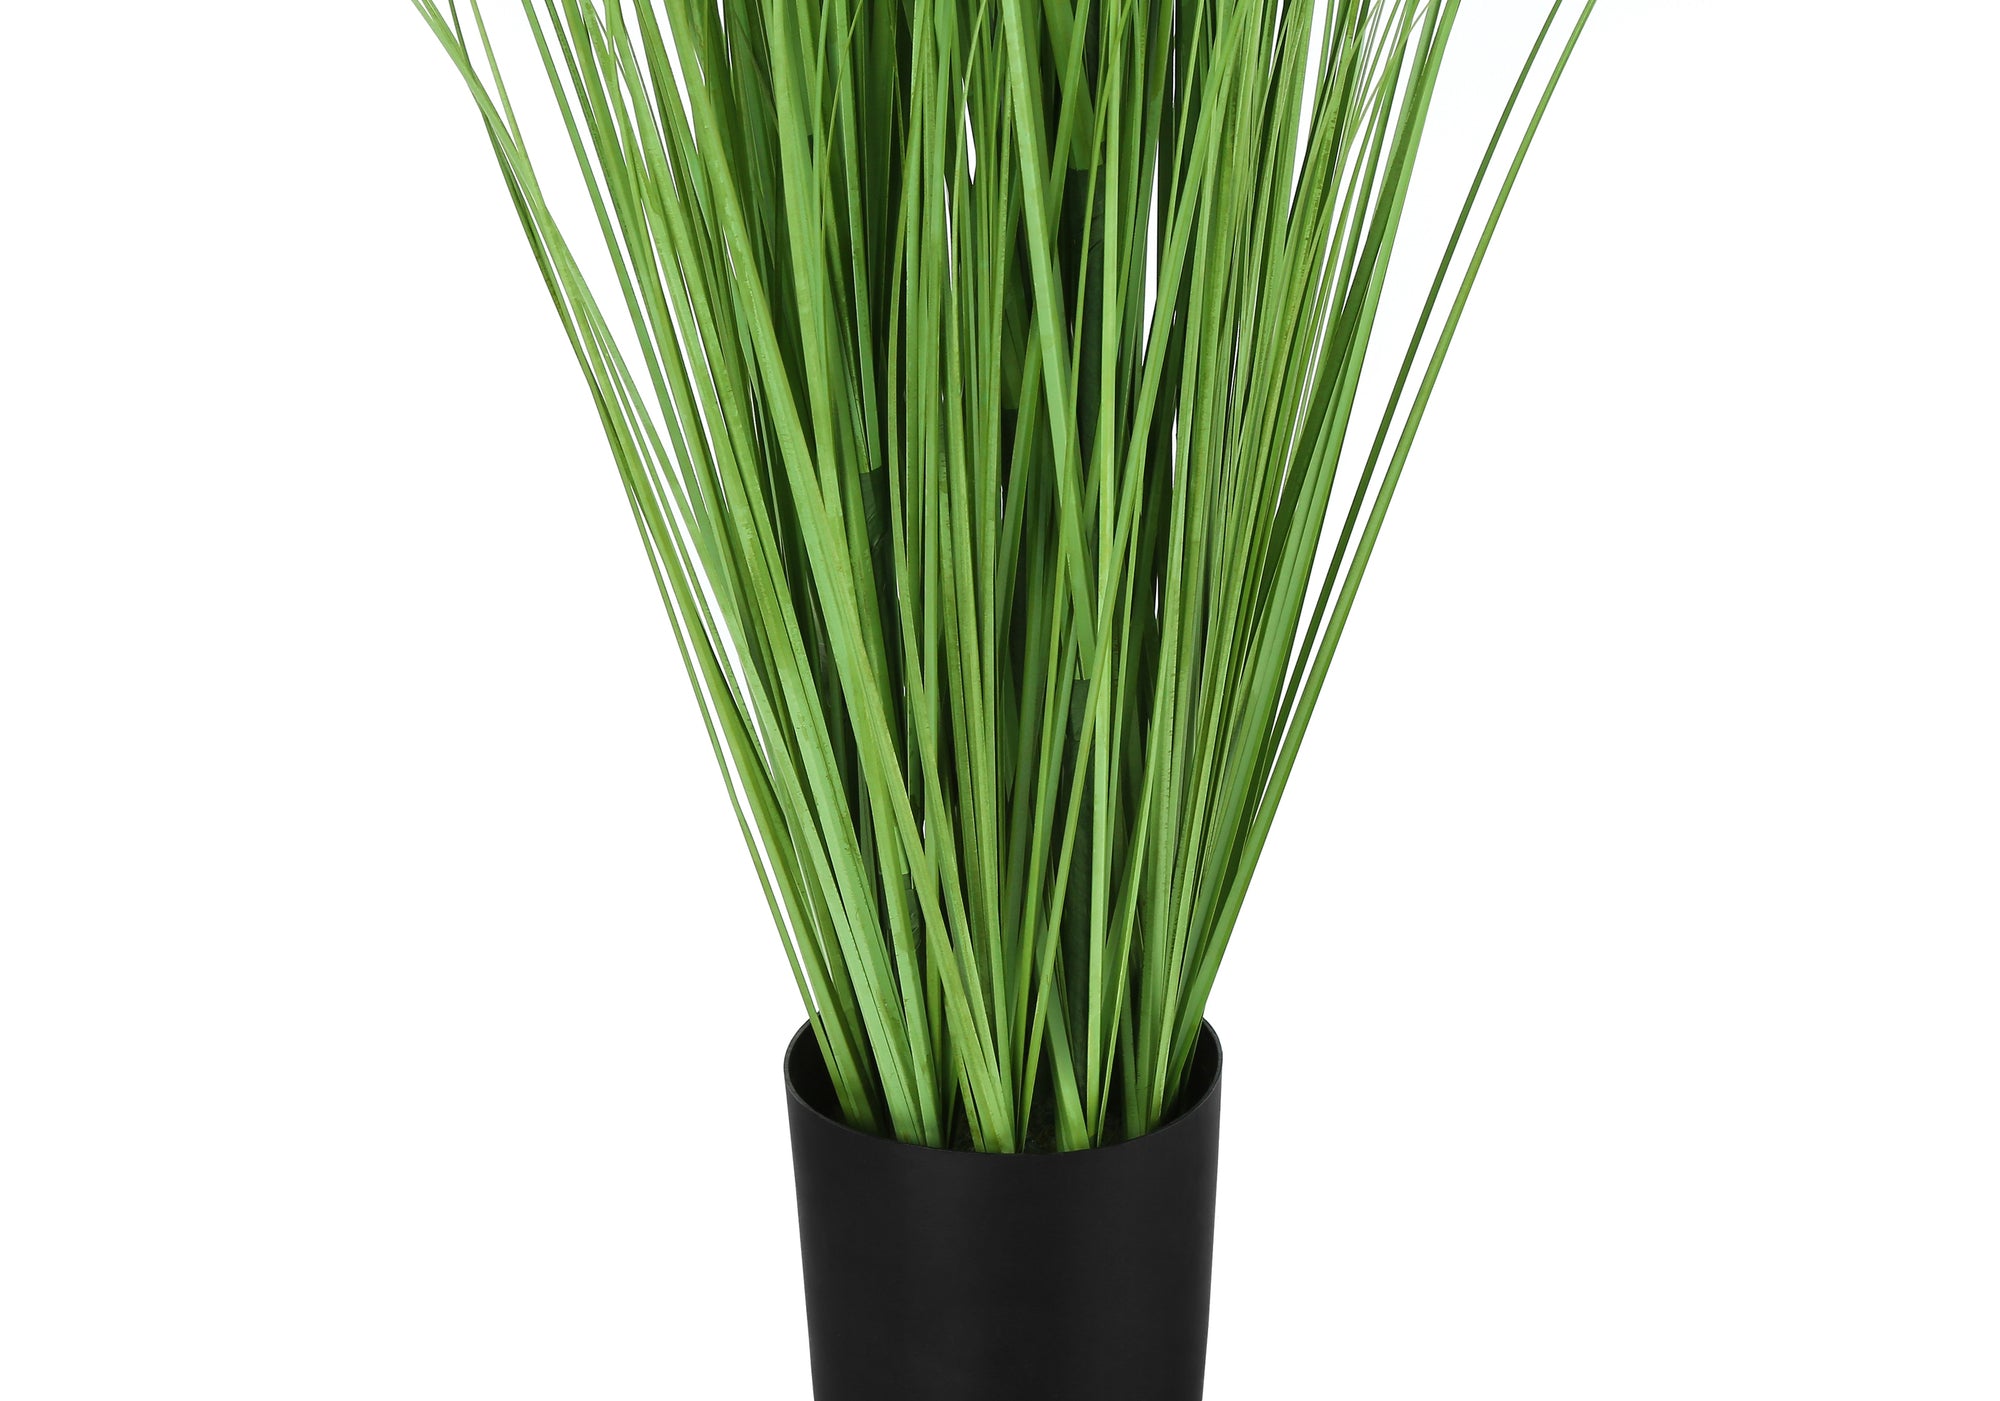 MN-589565    Artificial Plant, 47" Tall, Grass Tree, Indoor, Faux, Fake, Floor, Greenery, Potted, Real Touch, Decorative, Green Grass, Black Pot